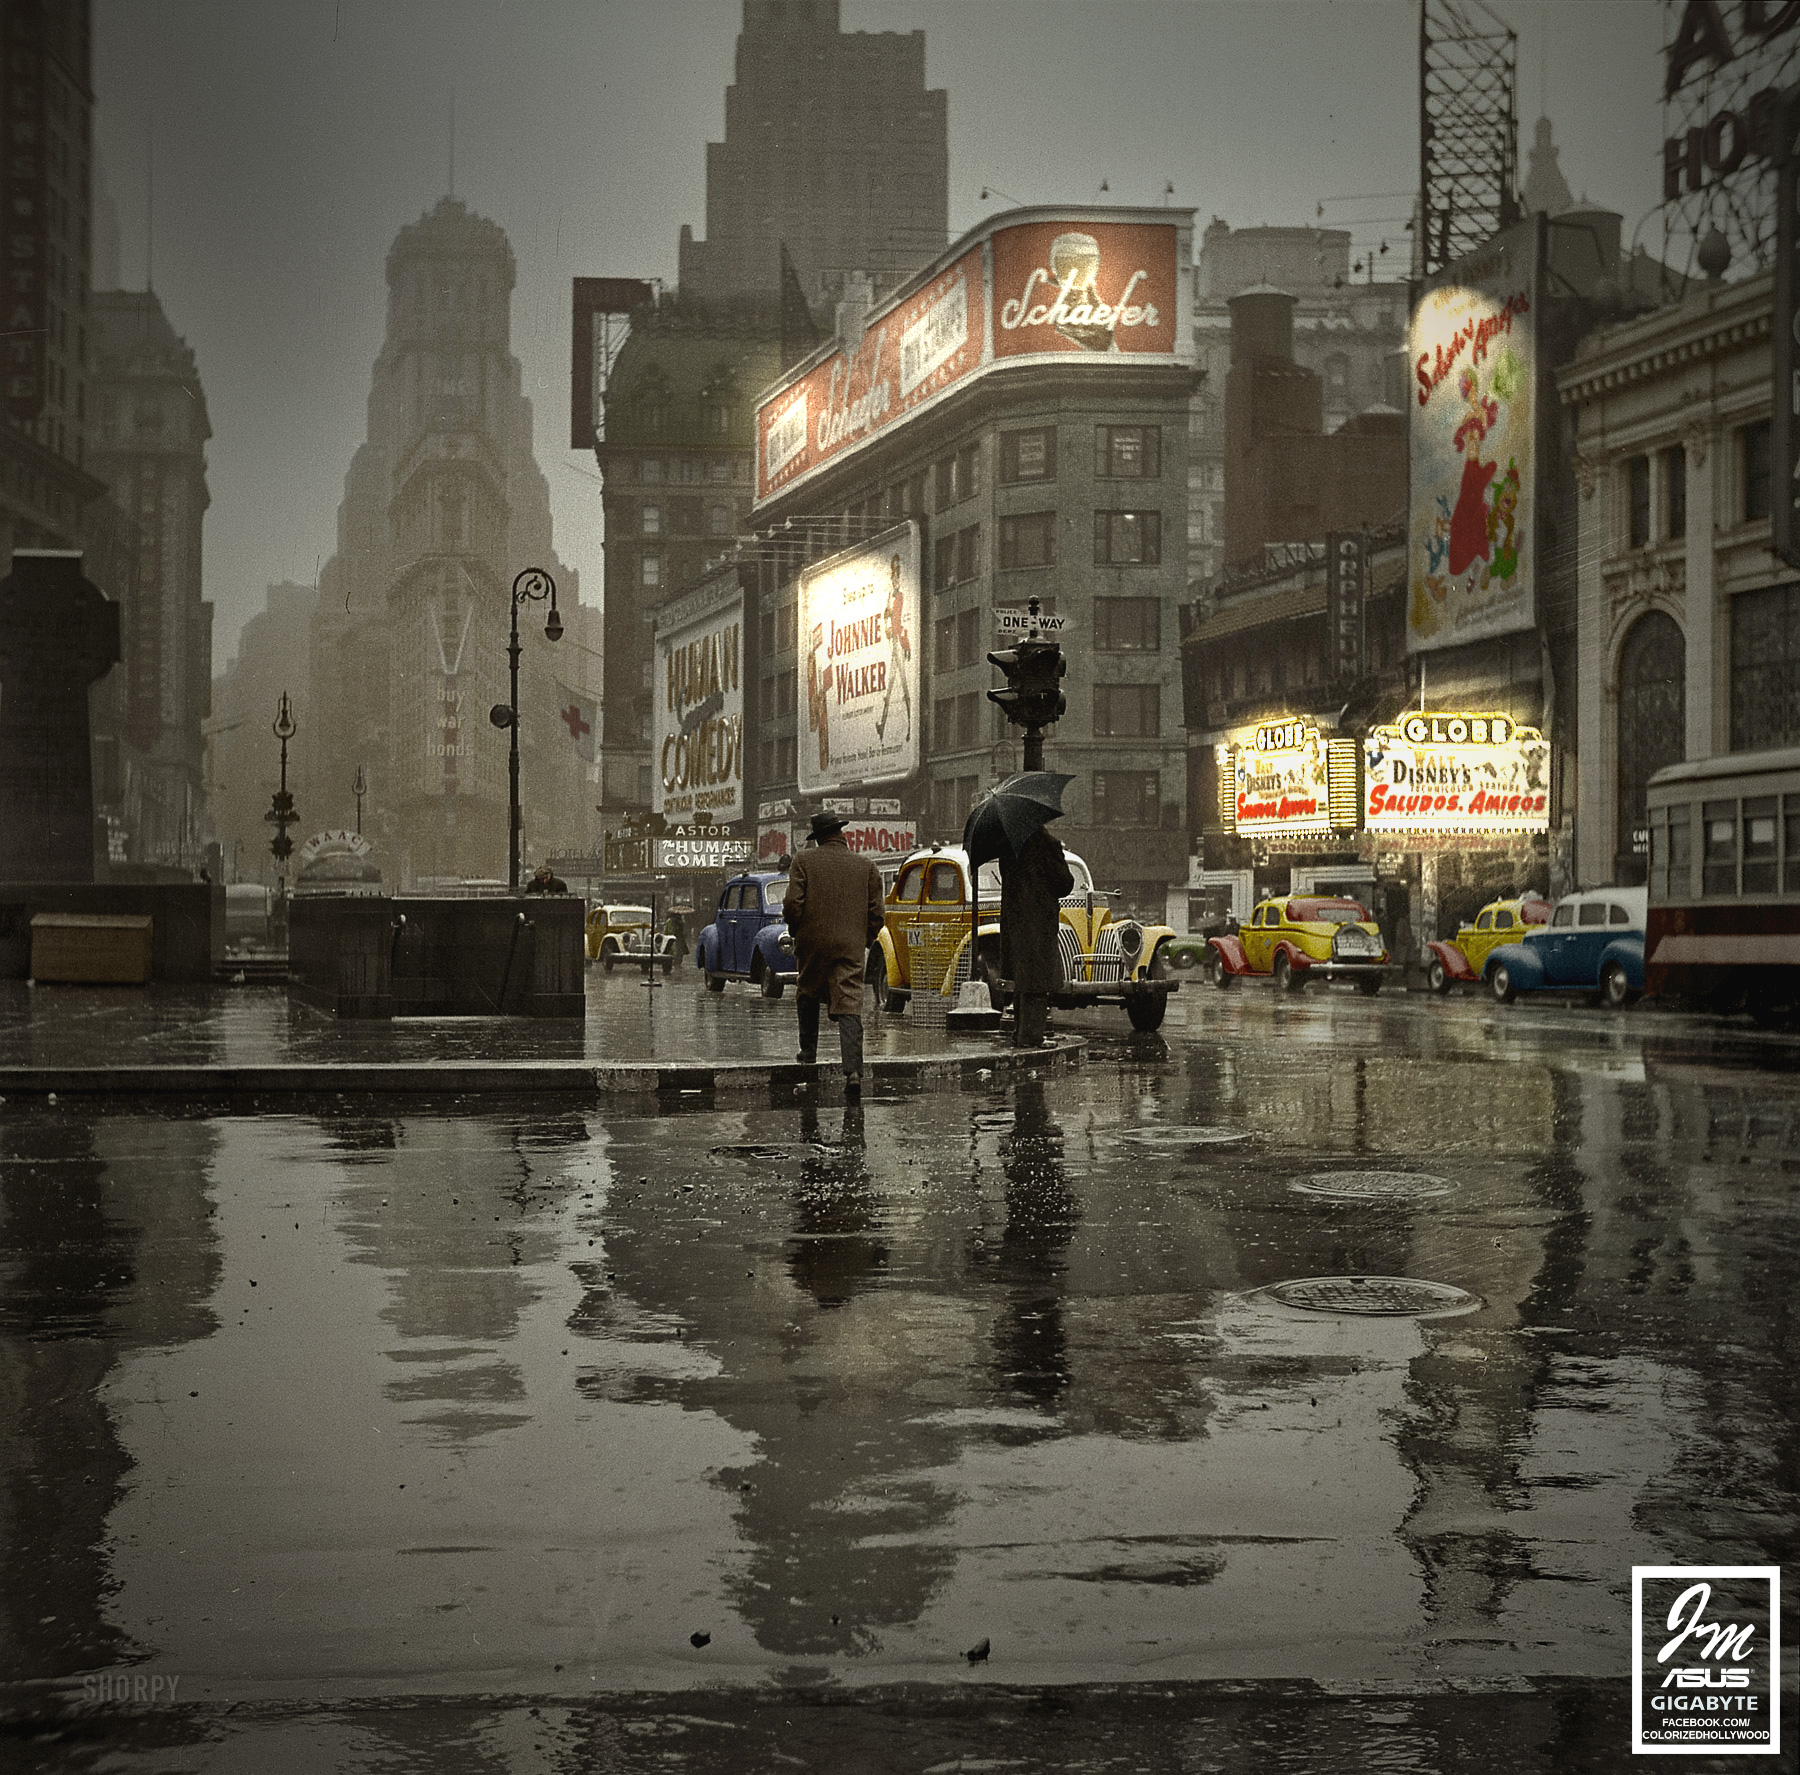 "Times Square on a rainy day." New York, March 1943